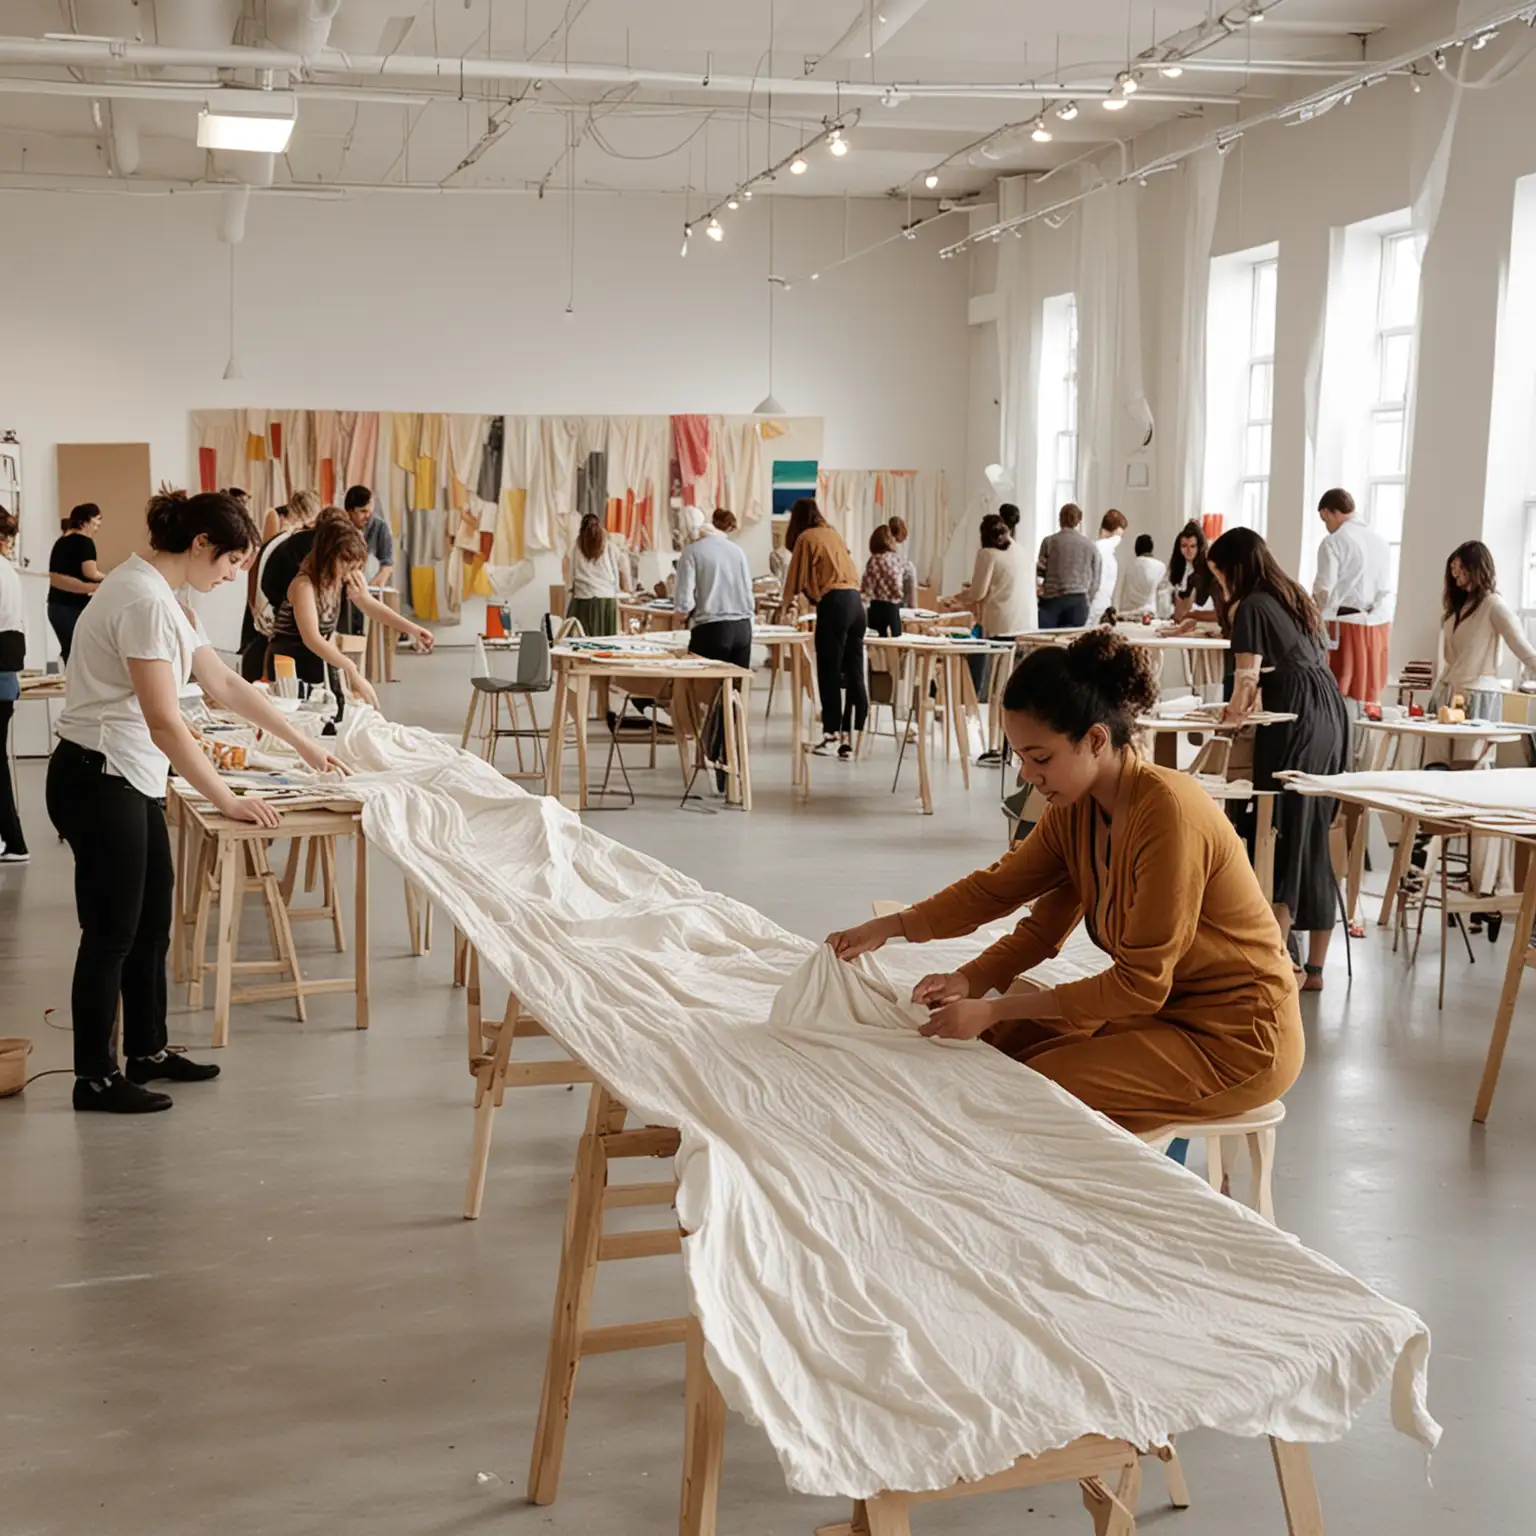 group of people working in an art space creating art with fabric. PGN 